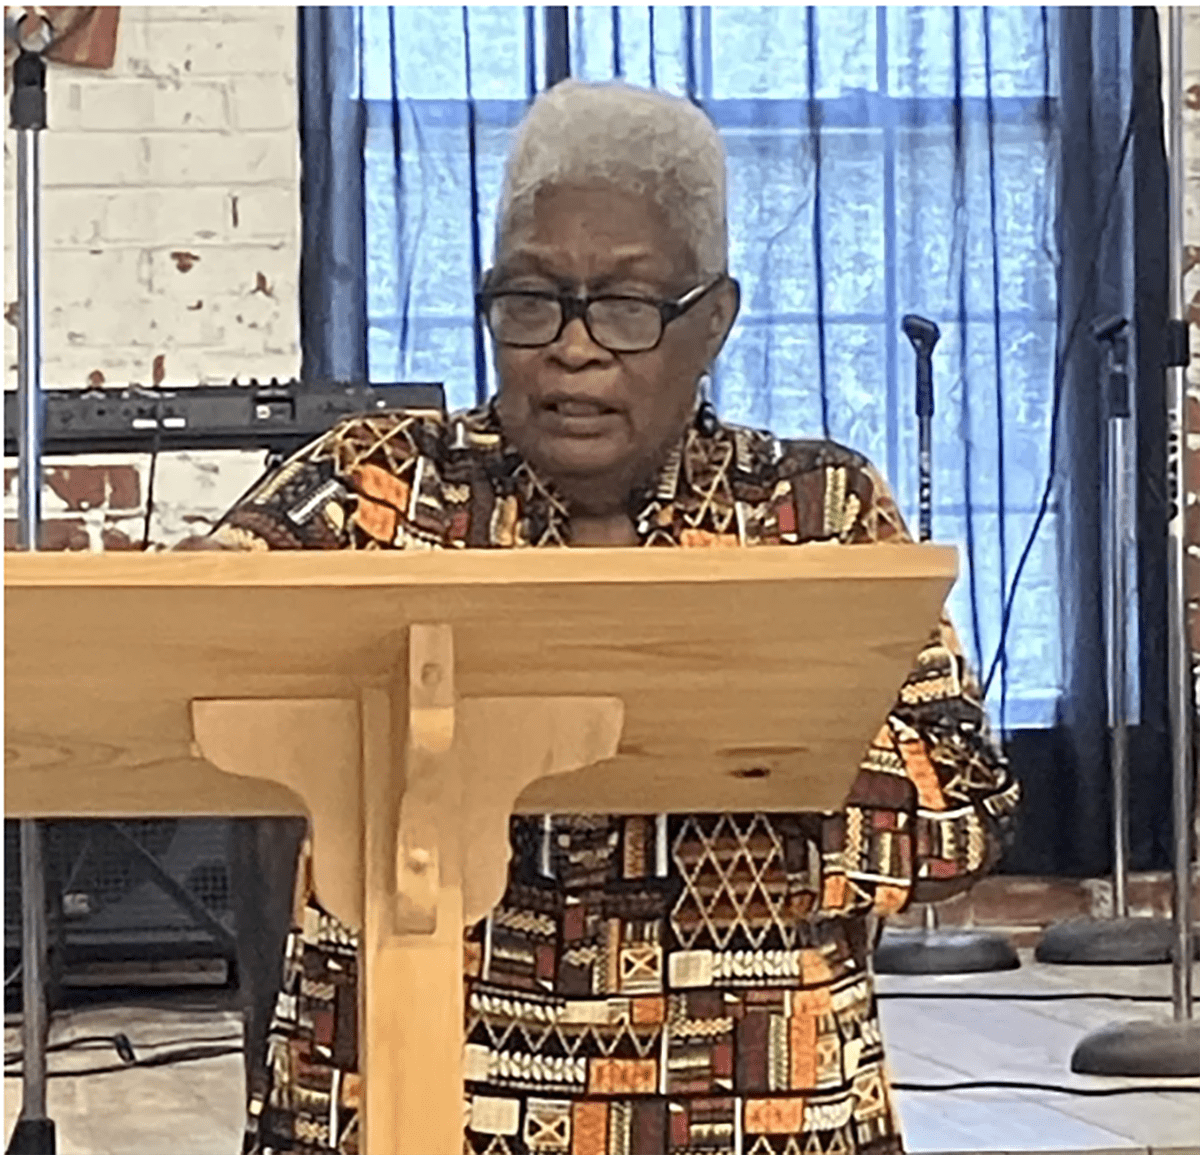 Another speaker, Ms. Gwendolyn Bowser, discussed the history of New Chapel Missionary Baptist Church, which was founded by one of the fugitive slaves who escaped to Plymouth during the Civil War. Photo: David Cecelski